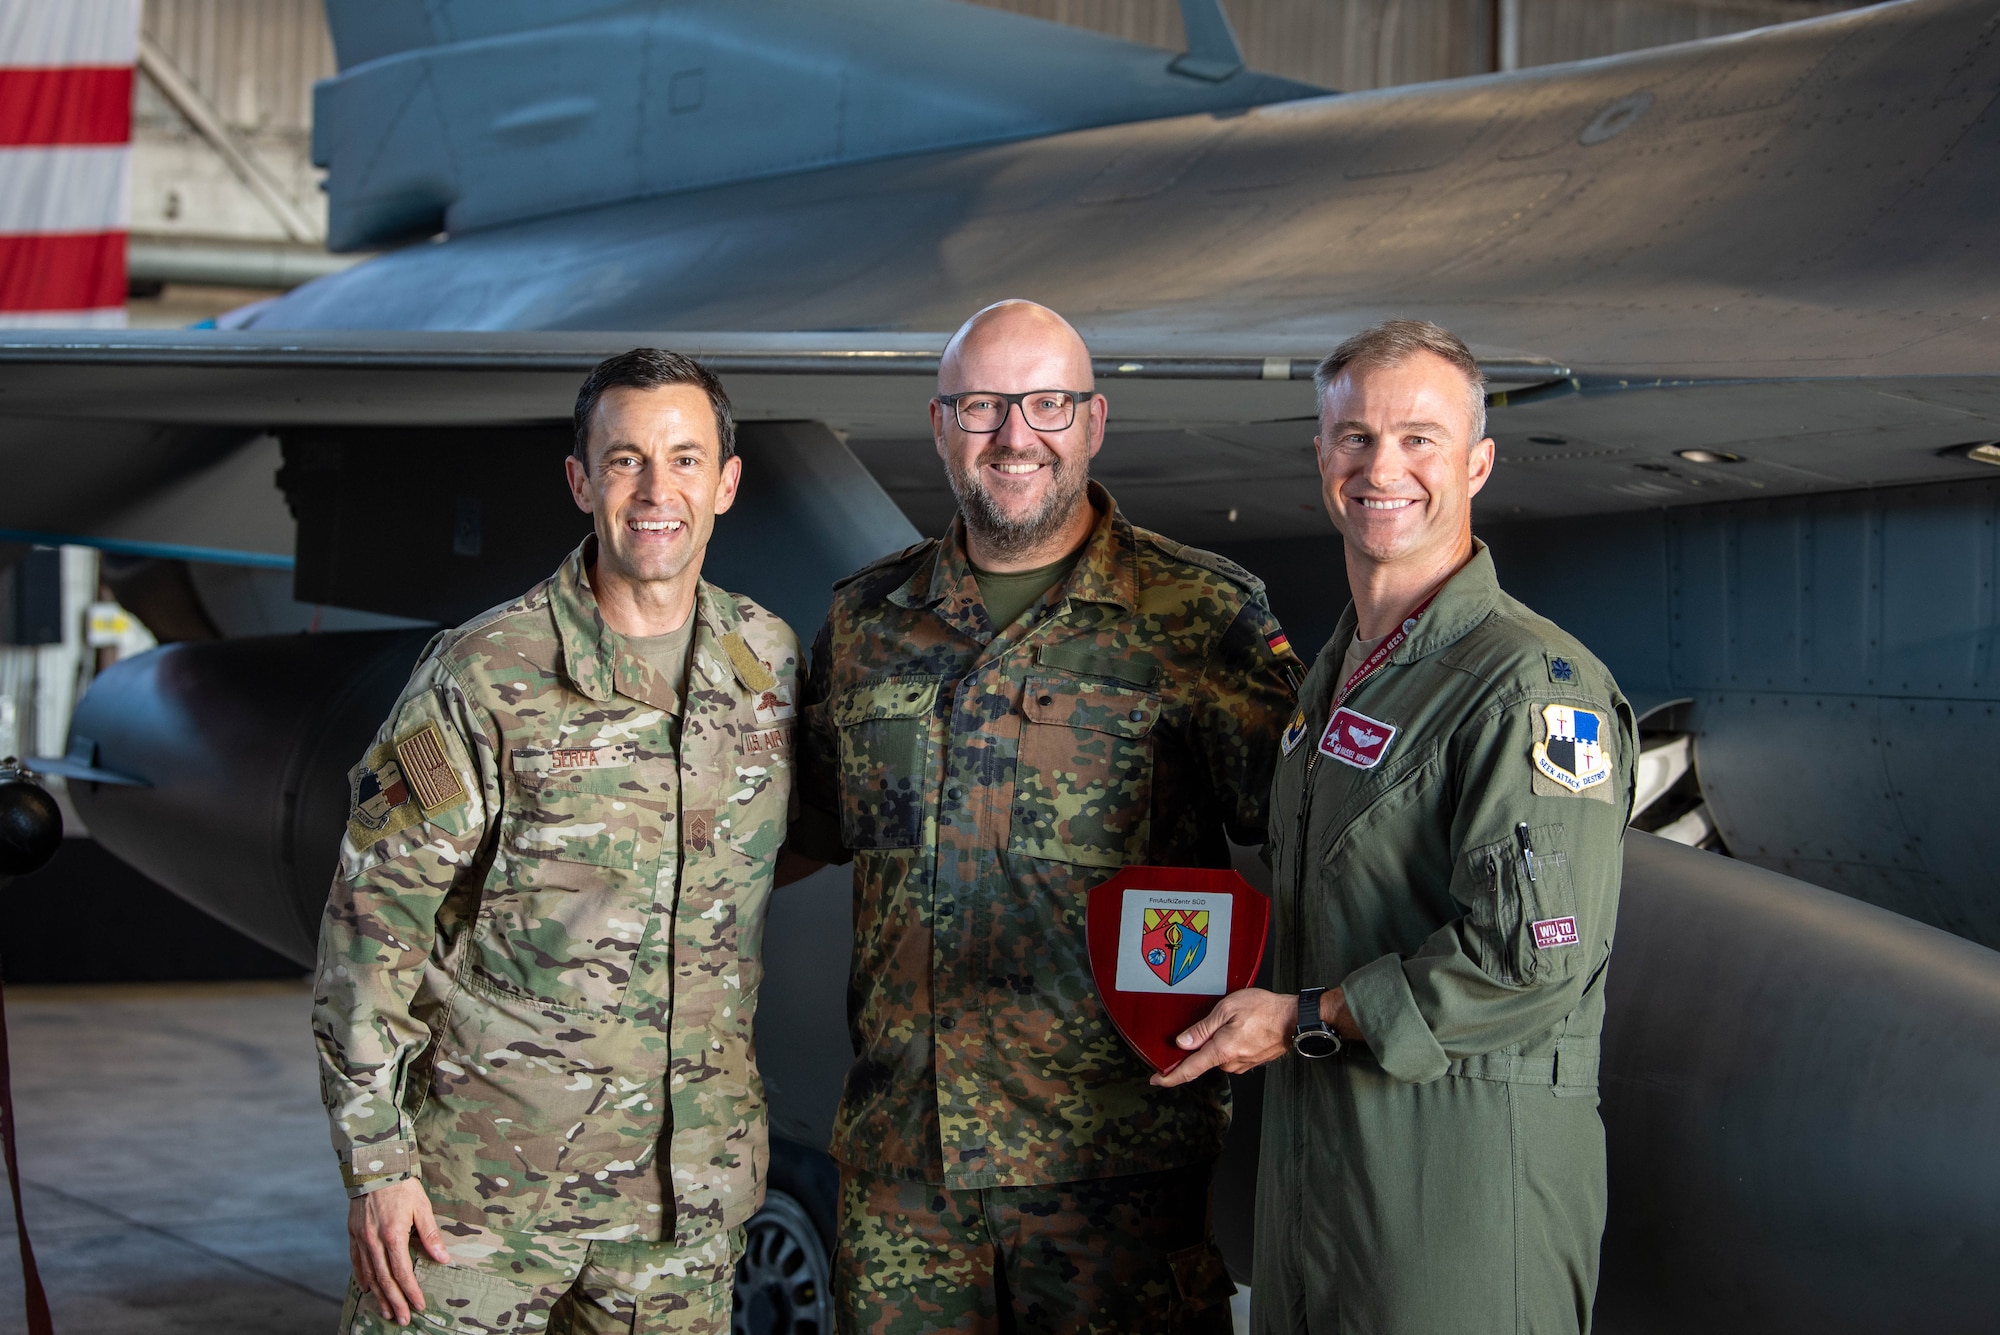 German Bundeswehr Lt. Col. Rafael Intek, Electronic Warfare Battalion 931, Electronic Reconnaissance Squadron commander (center), presents a plaque to U.S. Air Force Chief Master Sgt. Evan Serpa, 52nd Fighter Wing command chief (left), and Lt. Col. Nathaniel Hofmann, 52nd Operations Support Squadron commander (right), during a base tour at Spangdahlem Air Base, Germany, Sept. 6, 2023.